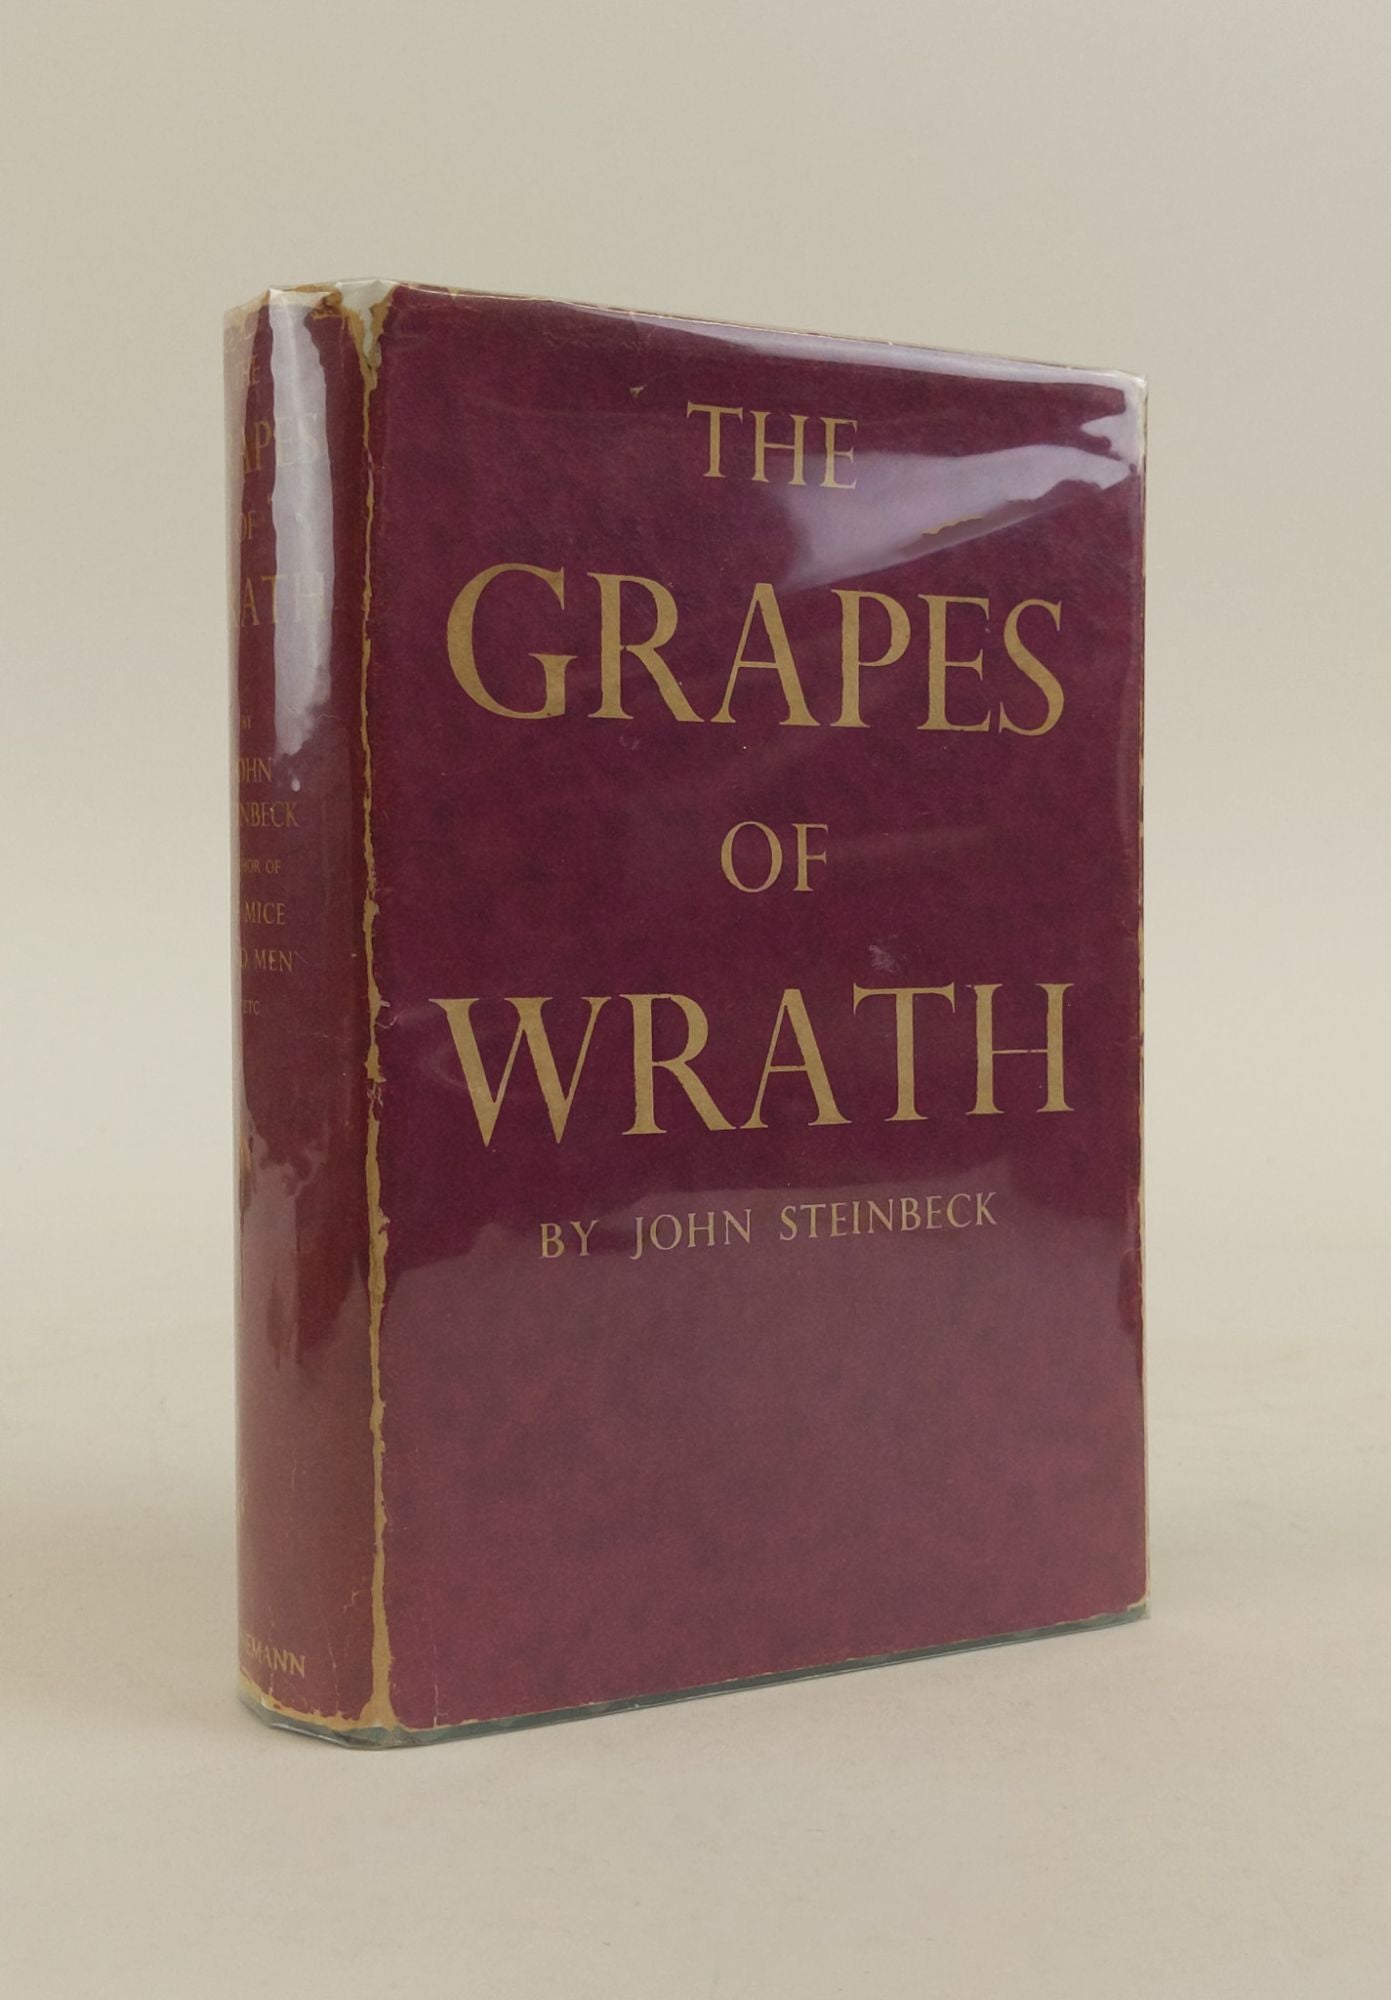 Product Image for THE GRAPES OF WRATH